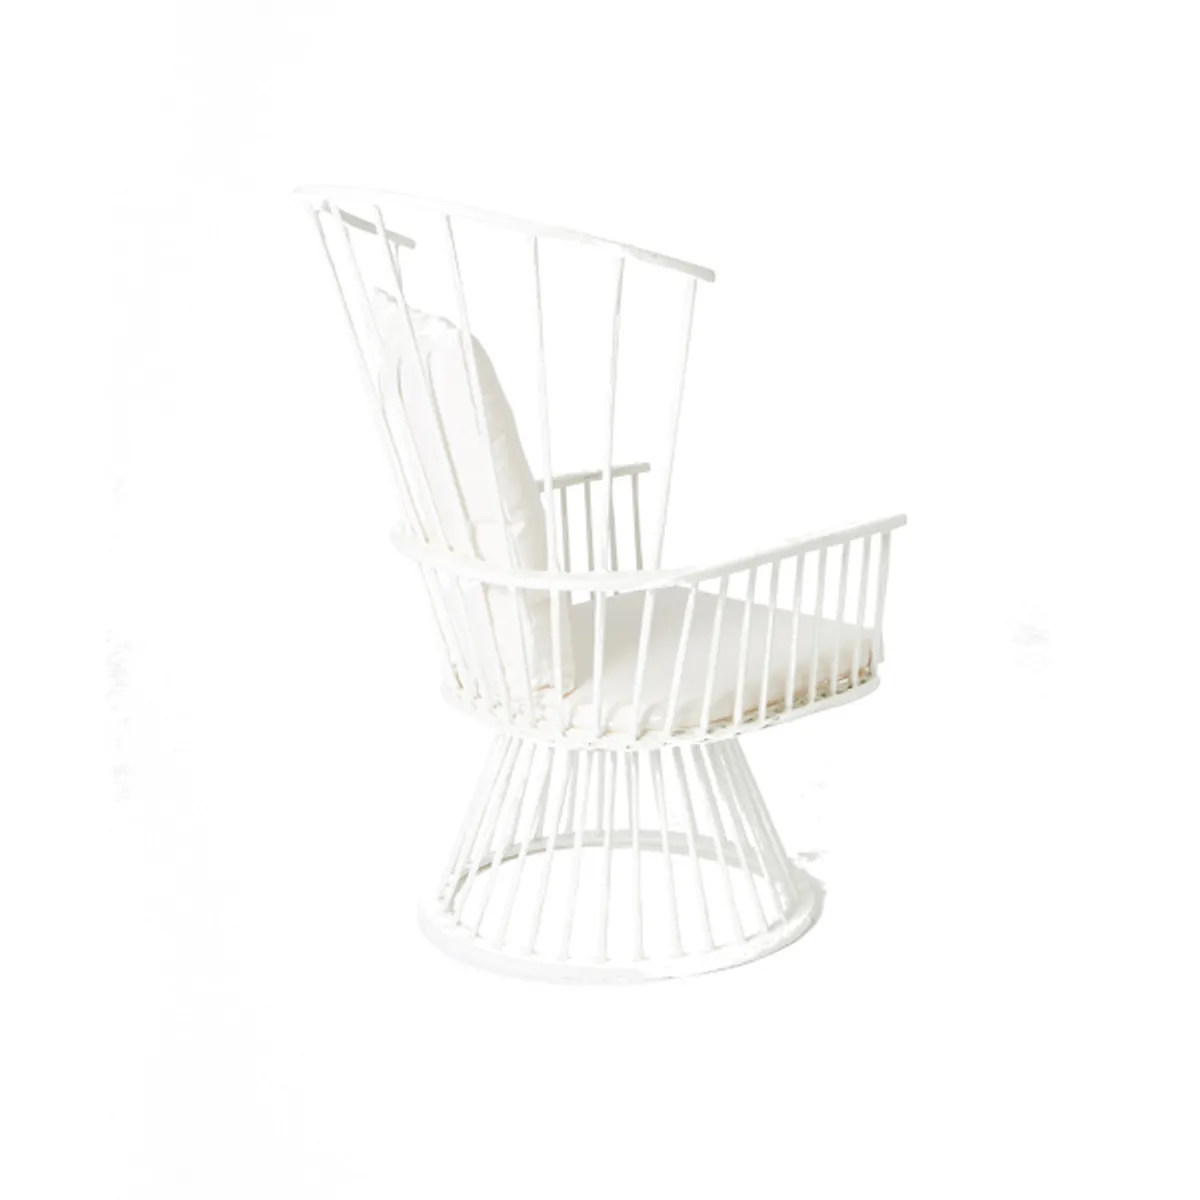 Cadizcagehighbackchair Inside Out Contracts3